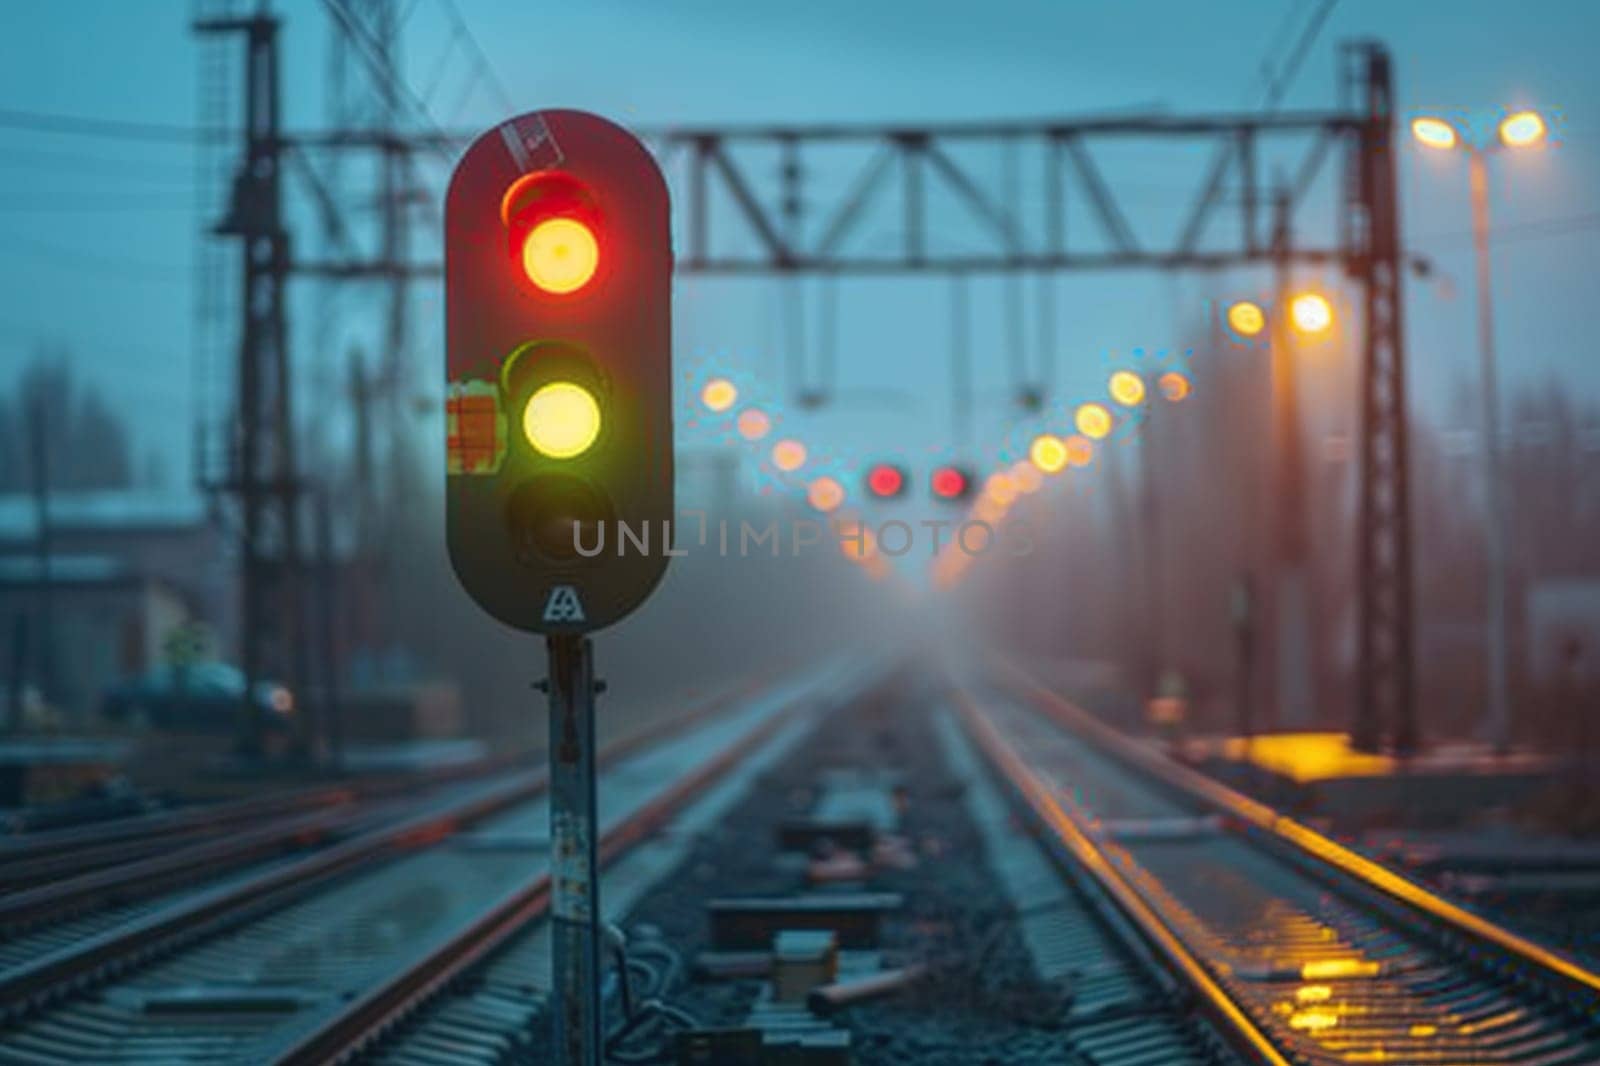 The traffic light between the railway tracks at dusk shows a red and green signal. Generated by artificial intelligence by Vovmar